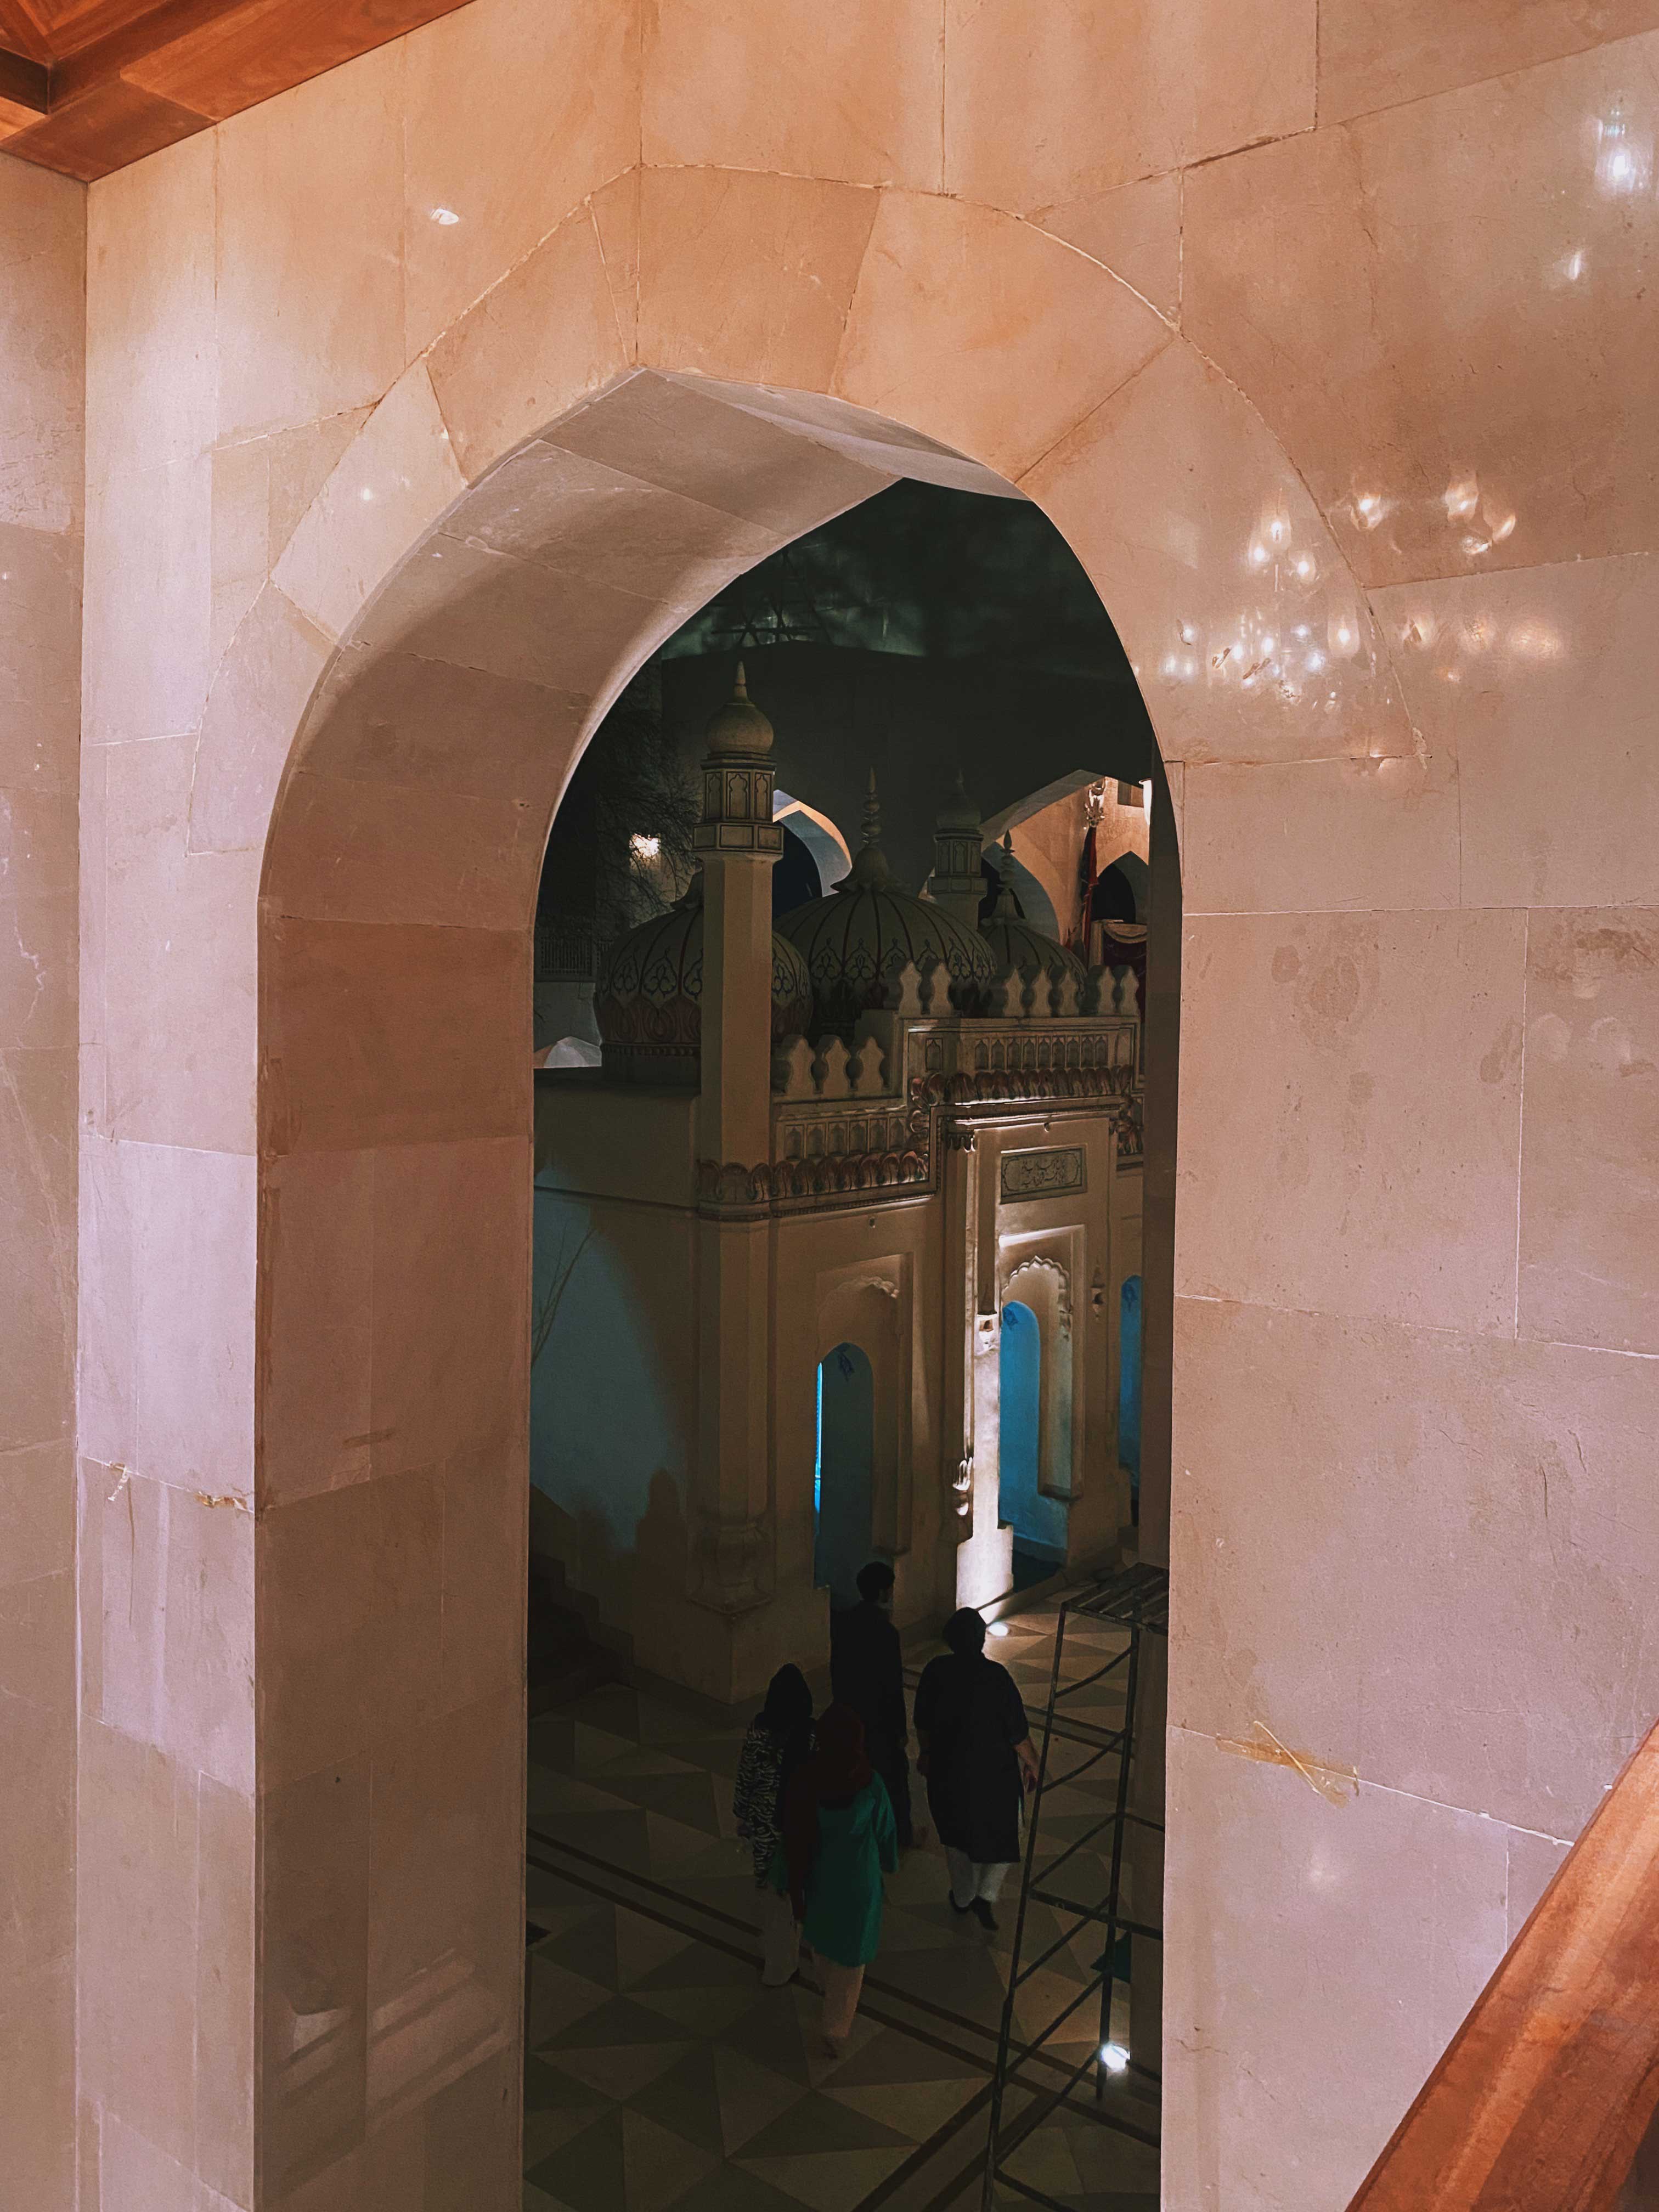 A view of the courtyard near the shrine from the second floor of the Bibi Pak Daman. — Photo by author